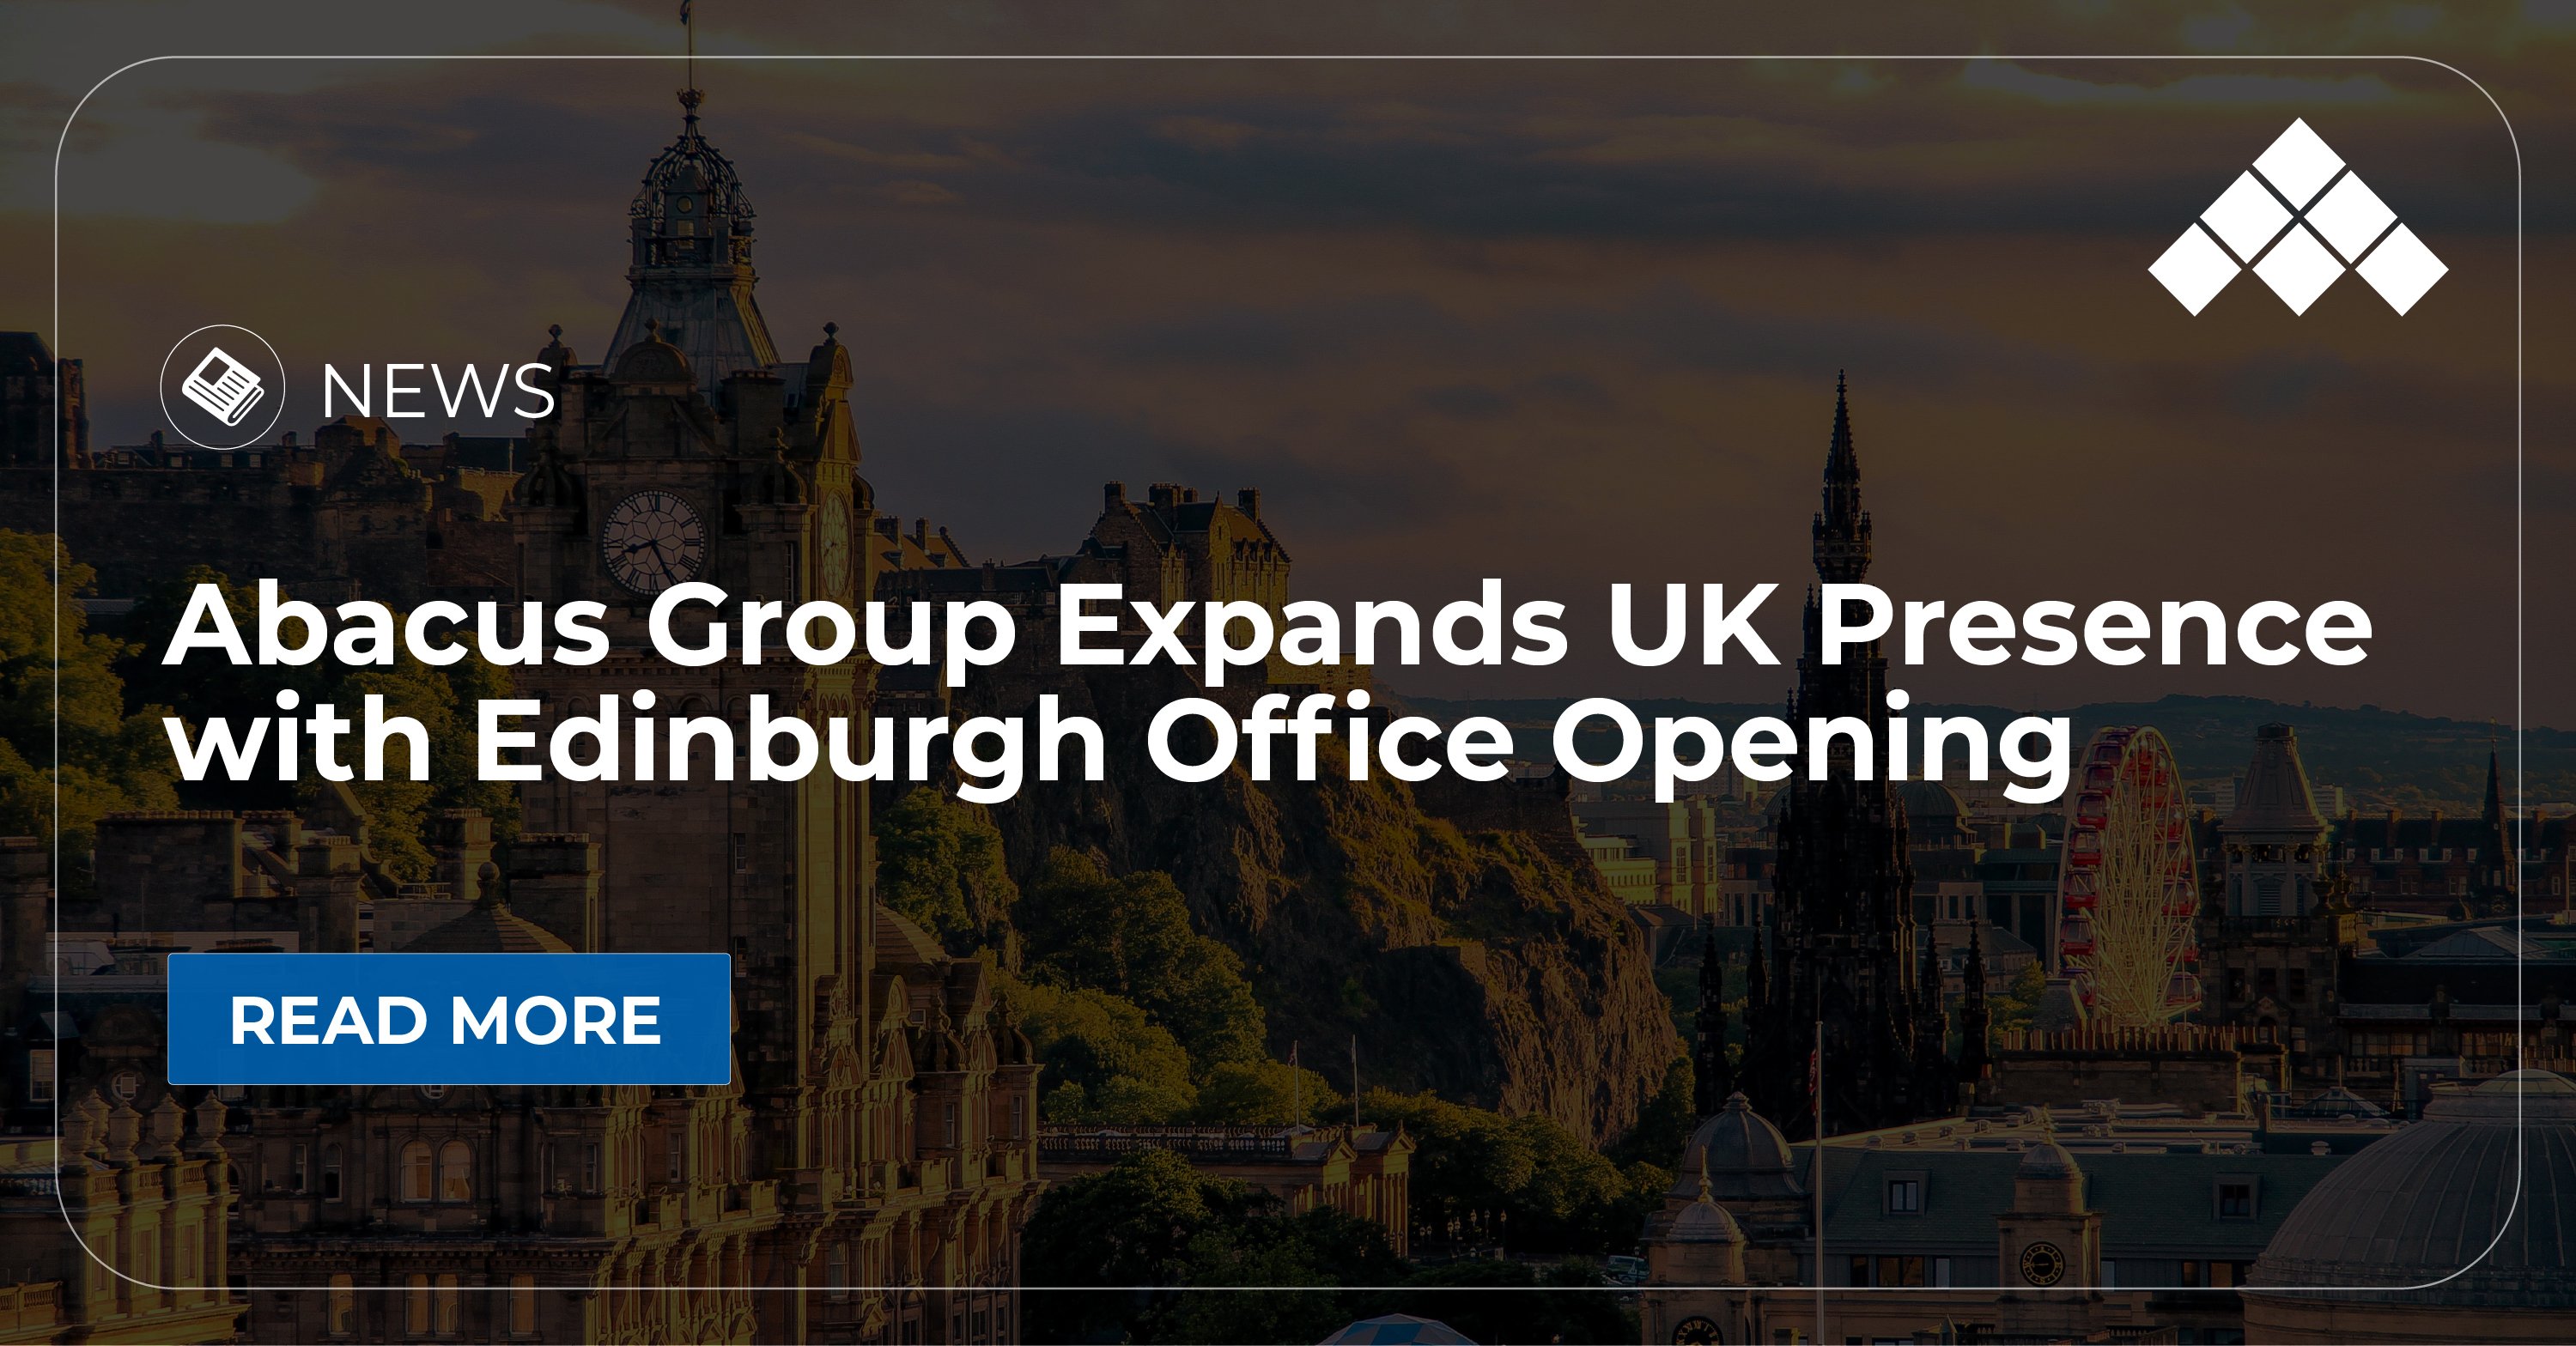 Abacus Group Expands UK Presence with Edinburgh Office Opening